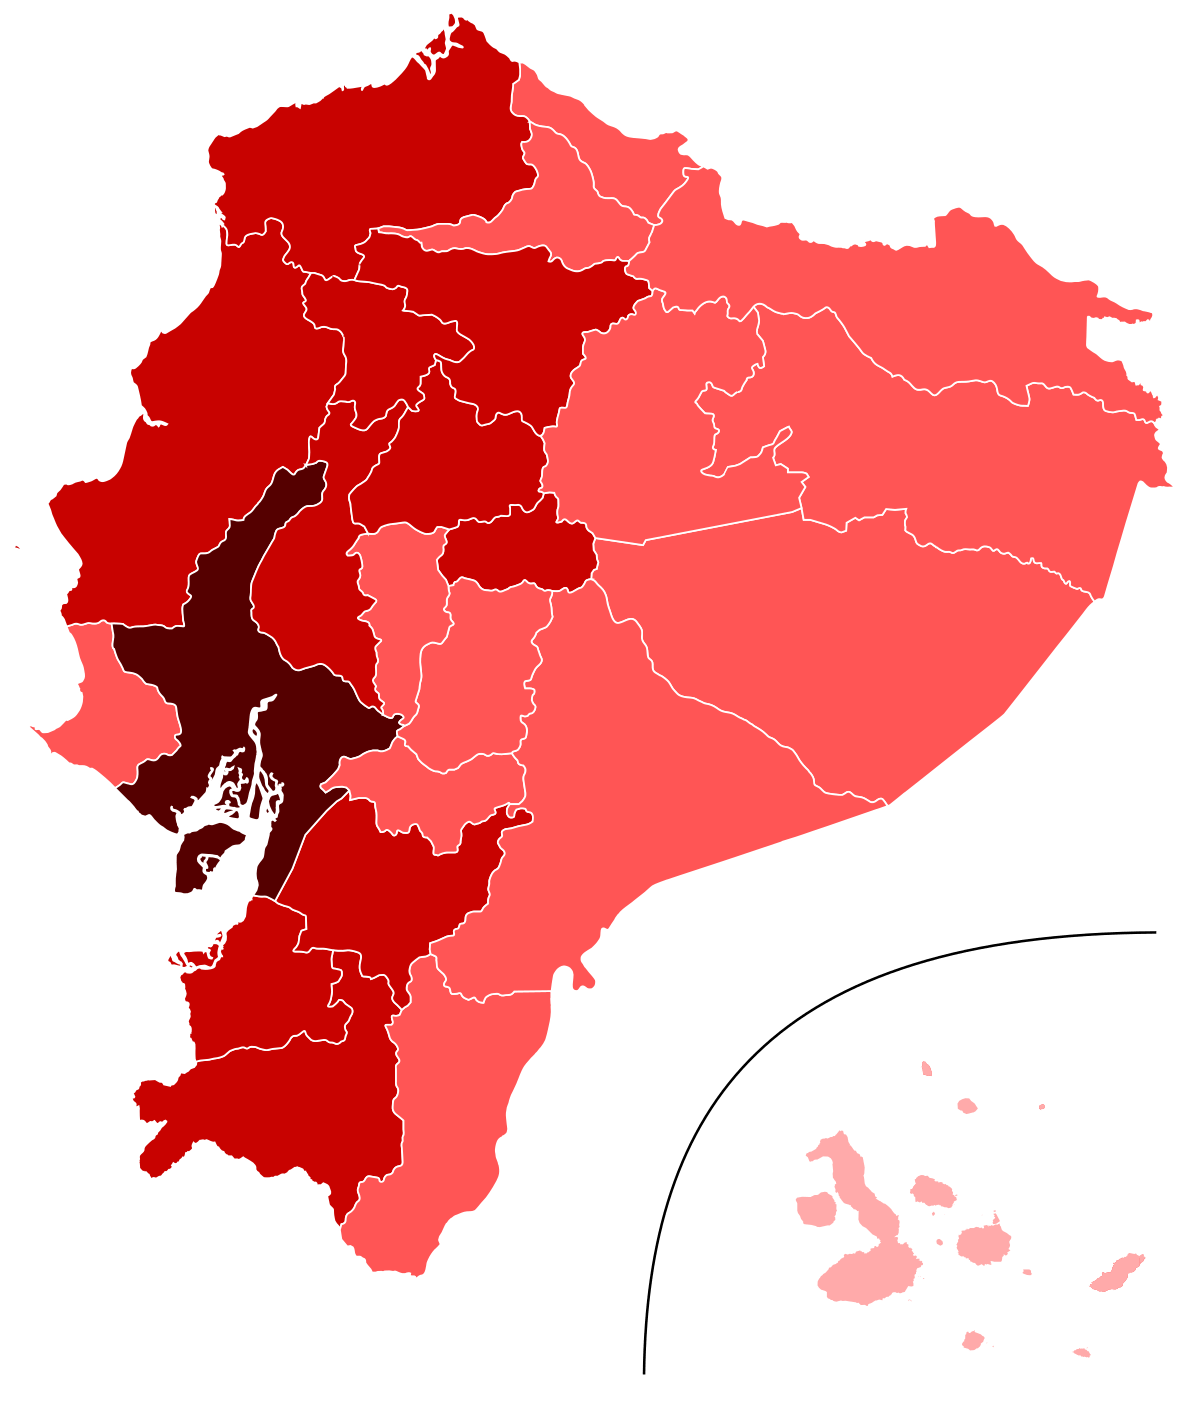 The areas most affected by Covid-19 are colored in dark red. It is Guayaqil and its hinterland.